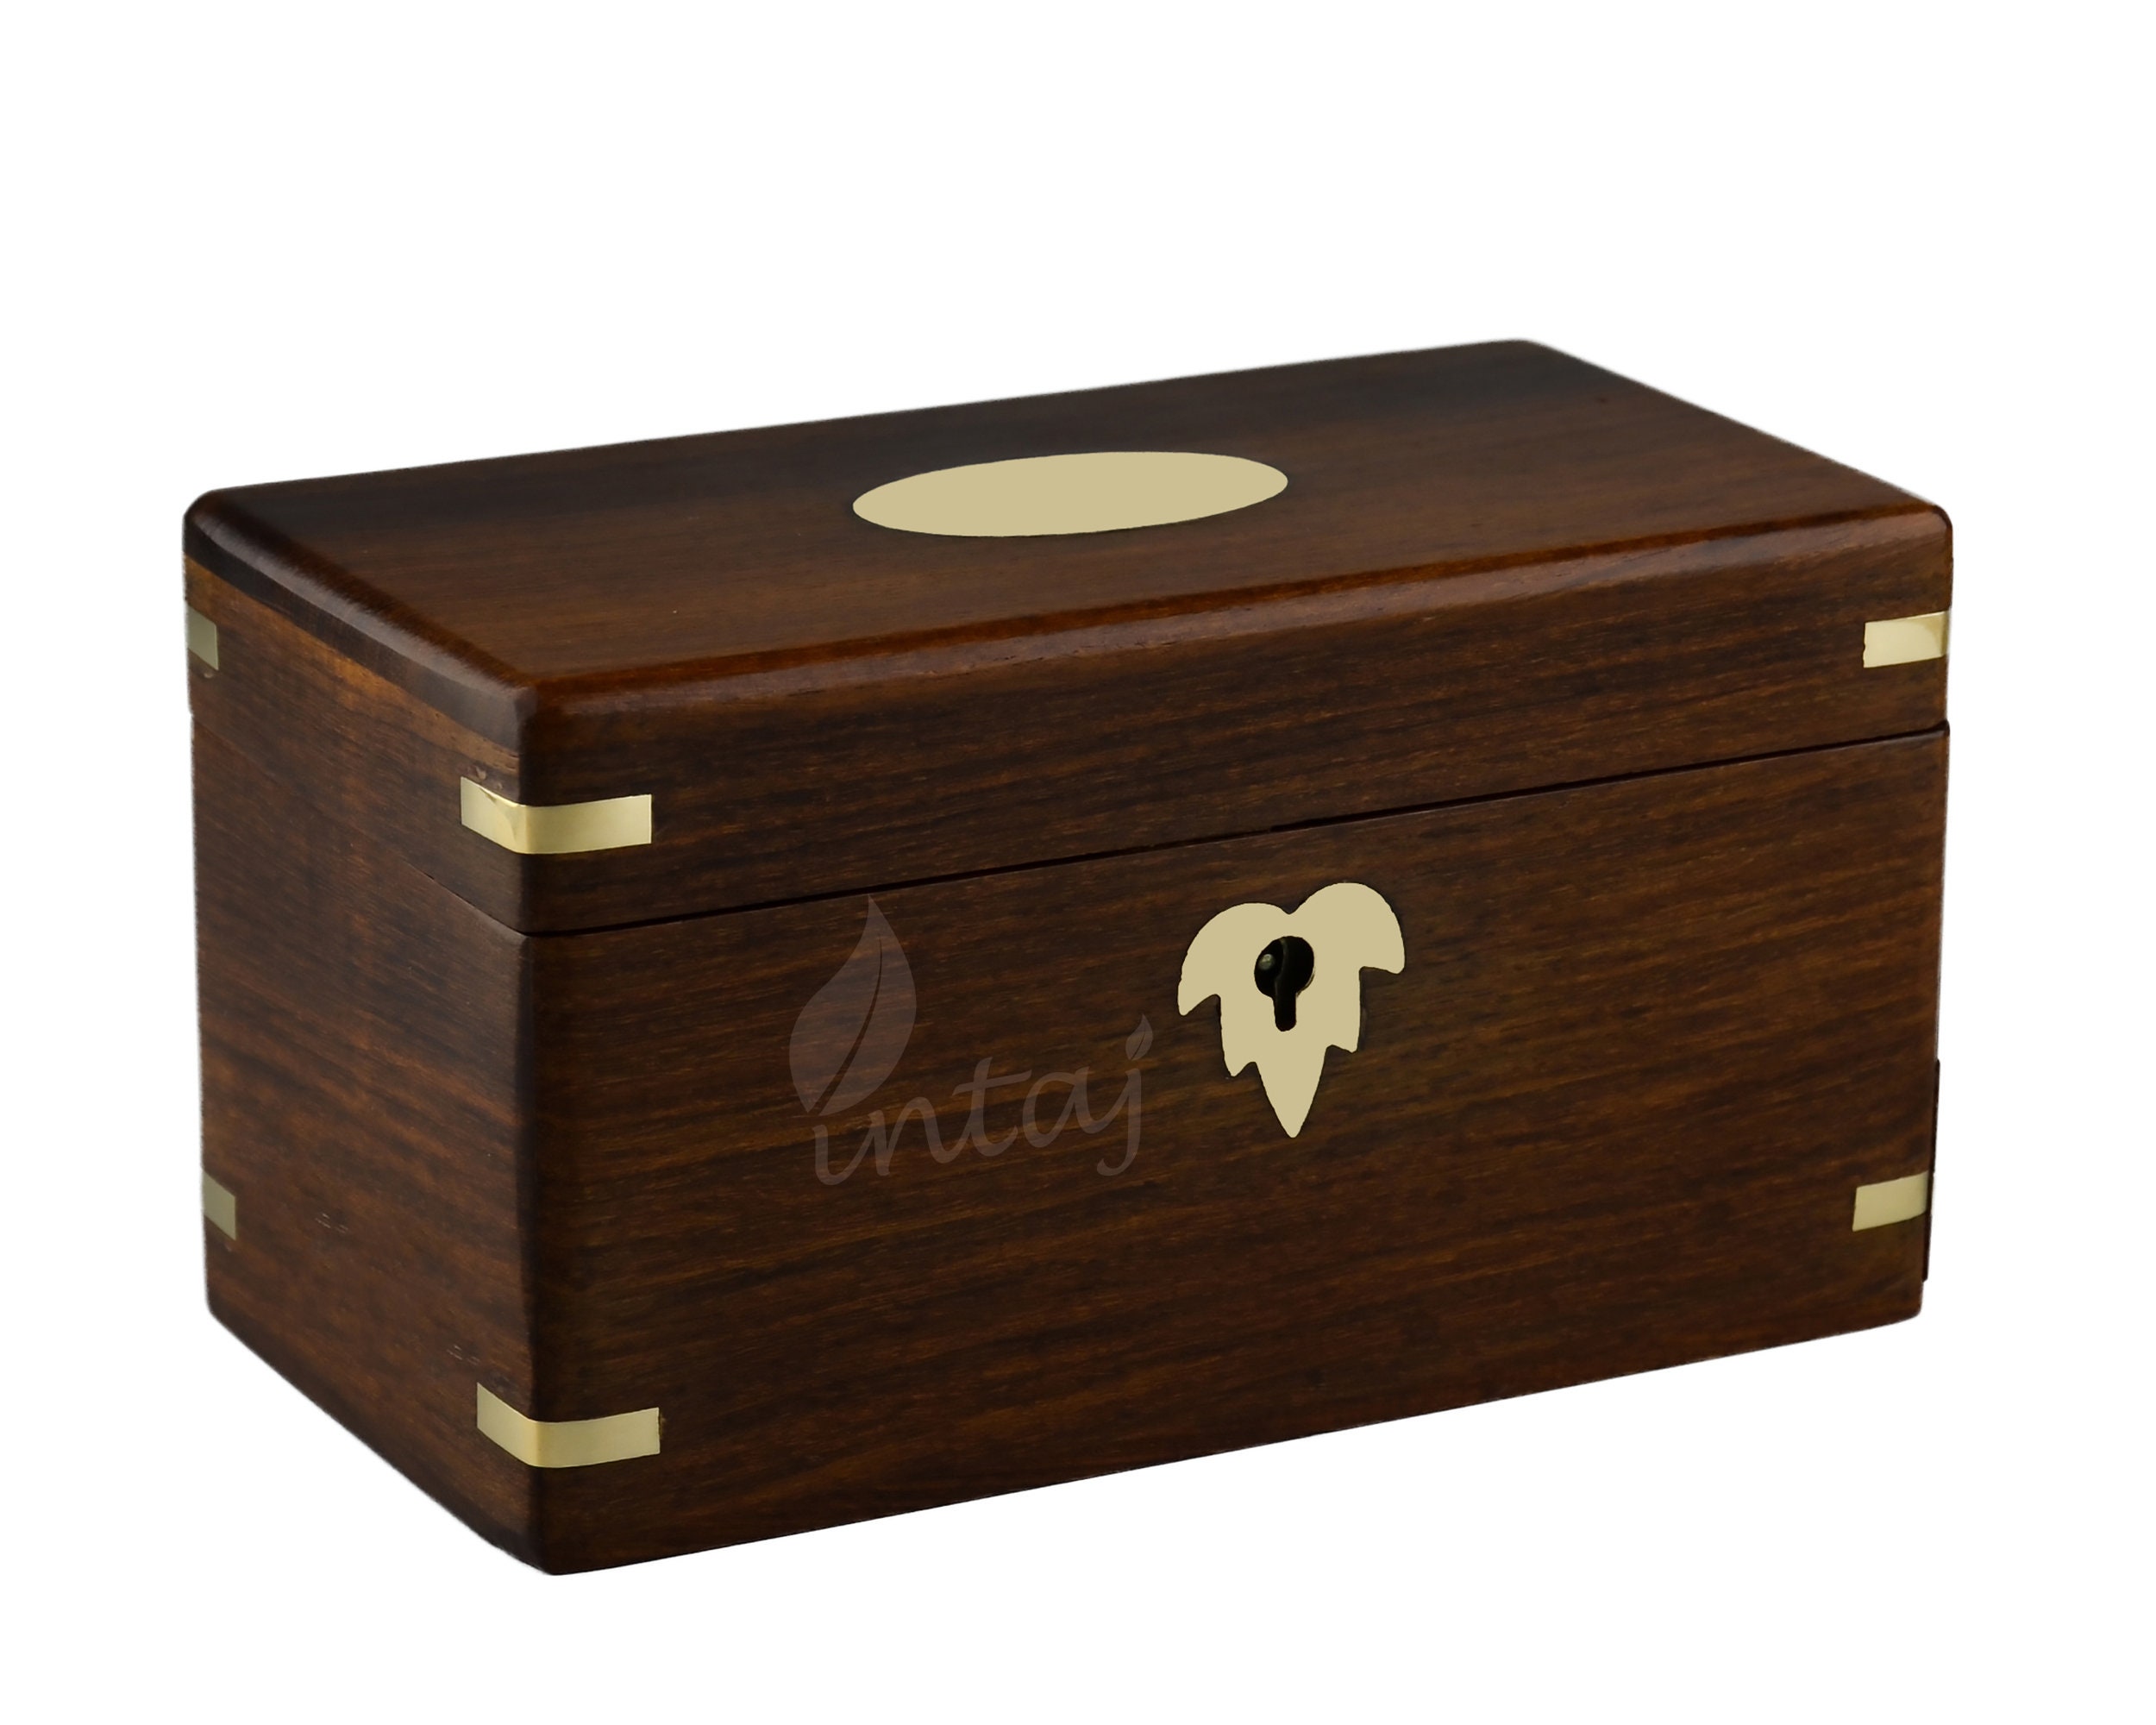 Wood Puzzle Secret Box with Hidden Compartments for Cards Hidden L 